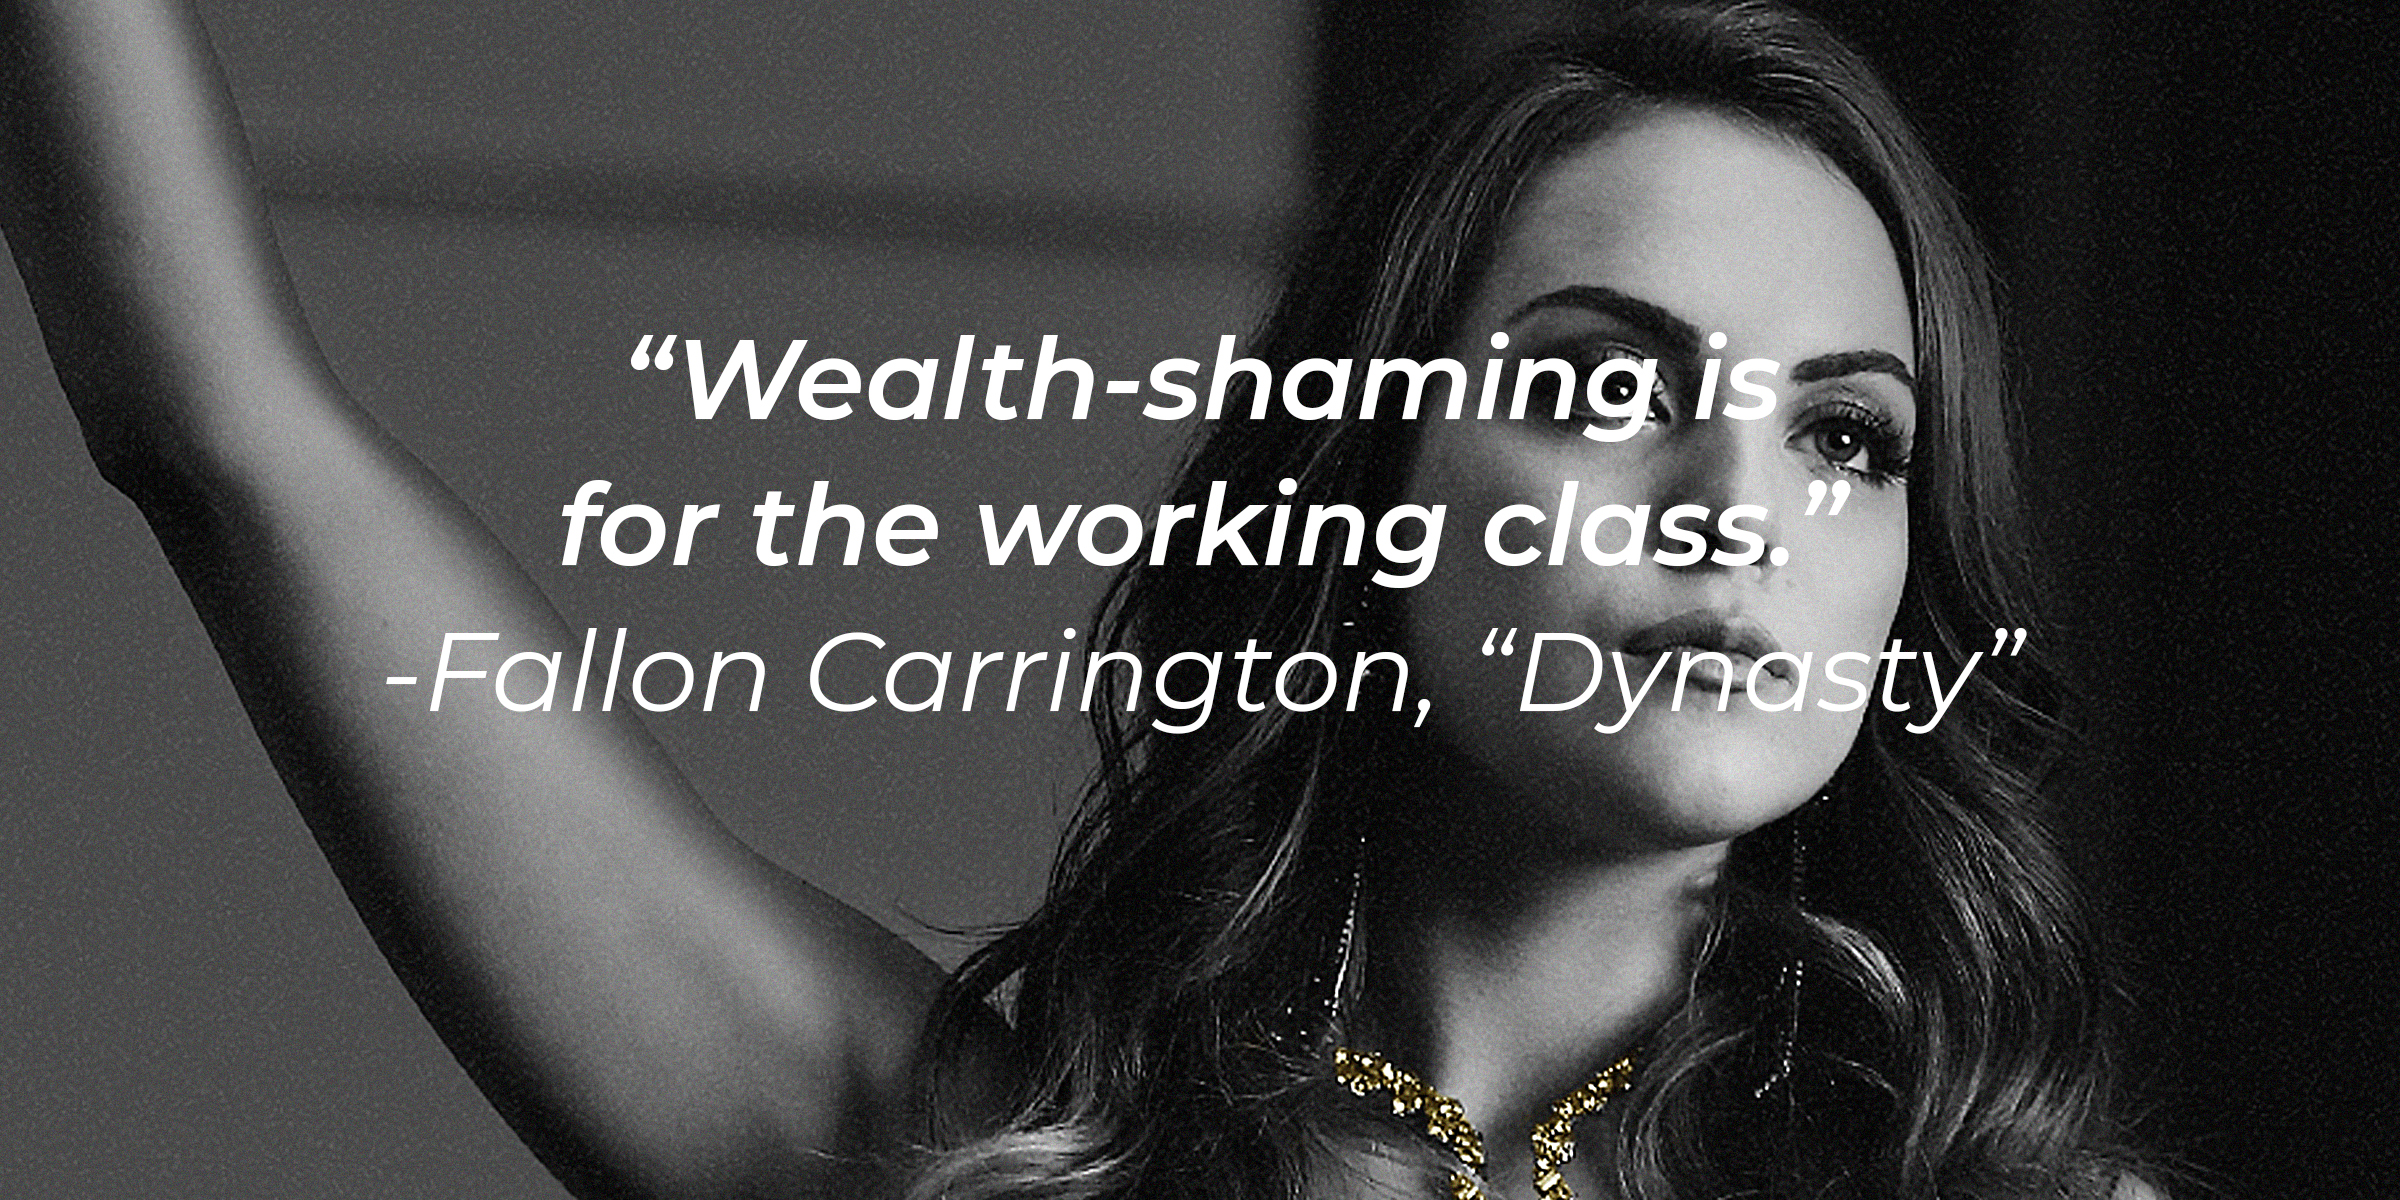 Fallon Carrington's quote from "Dynasty": "Wealth-shaming is for the working class." | Source: facebook.com/DynastyOnTheCW